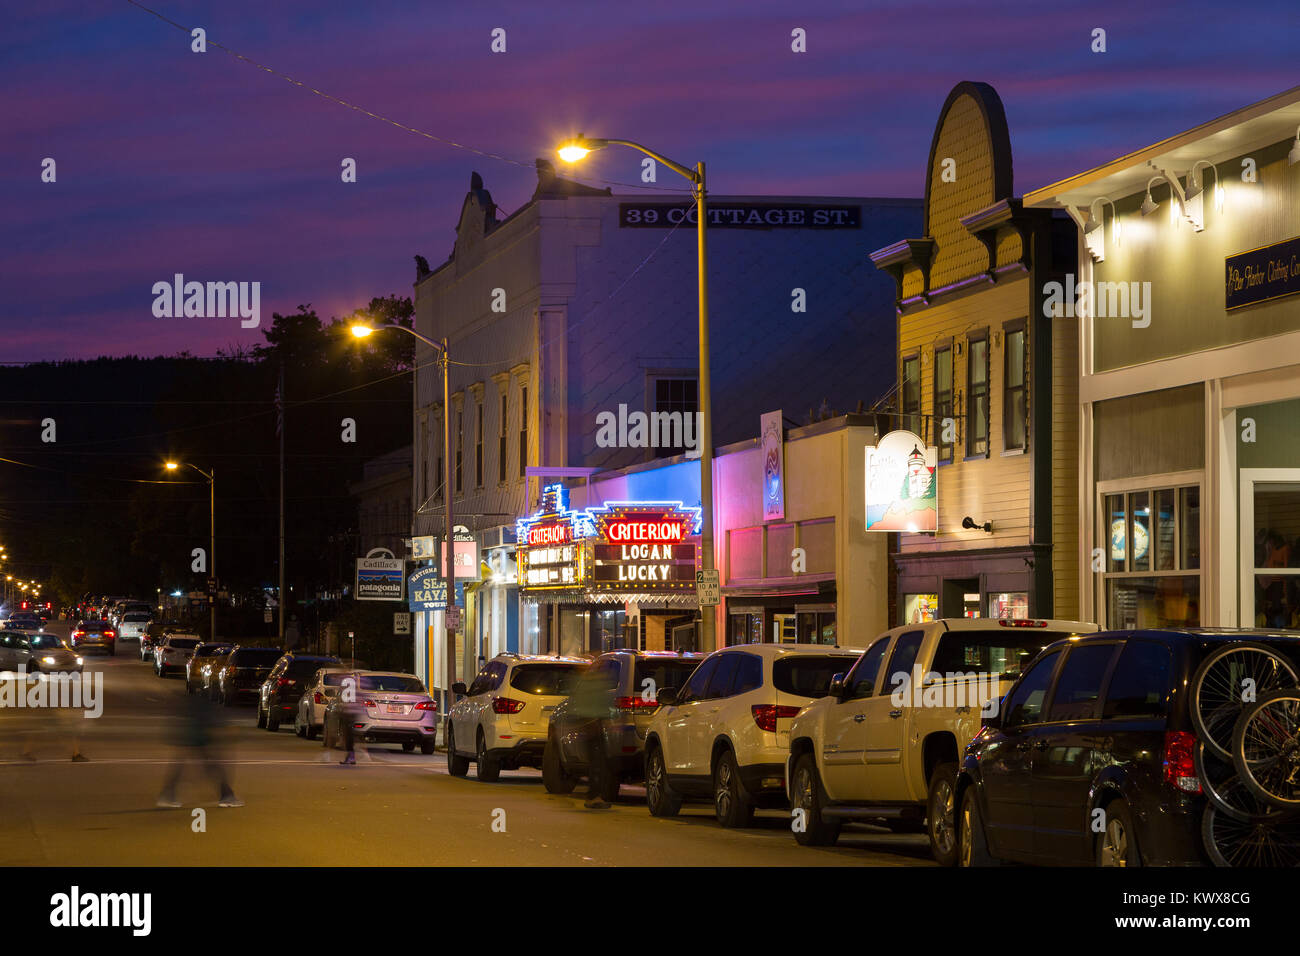 The old Criterion Theater lit up among other shops and commercial entities. Bar Harbor, Maine Stock Photo